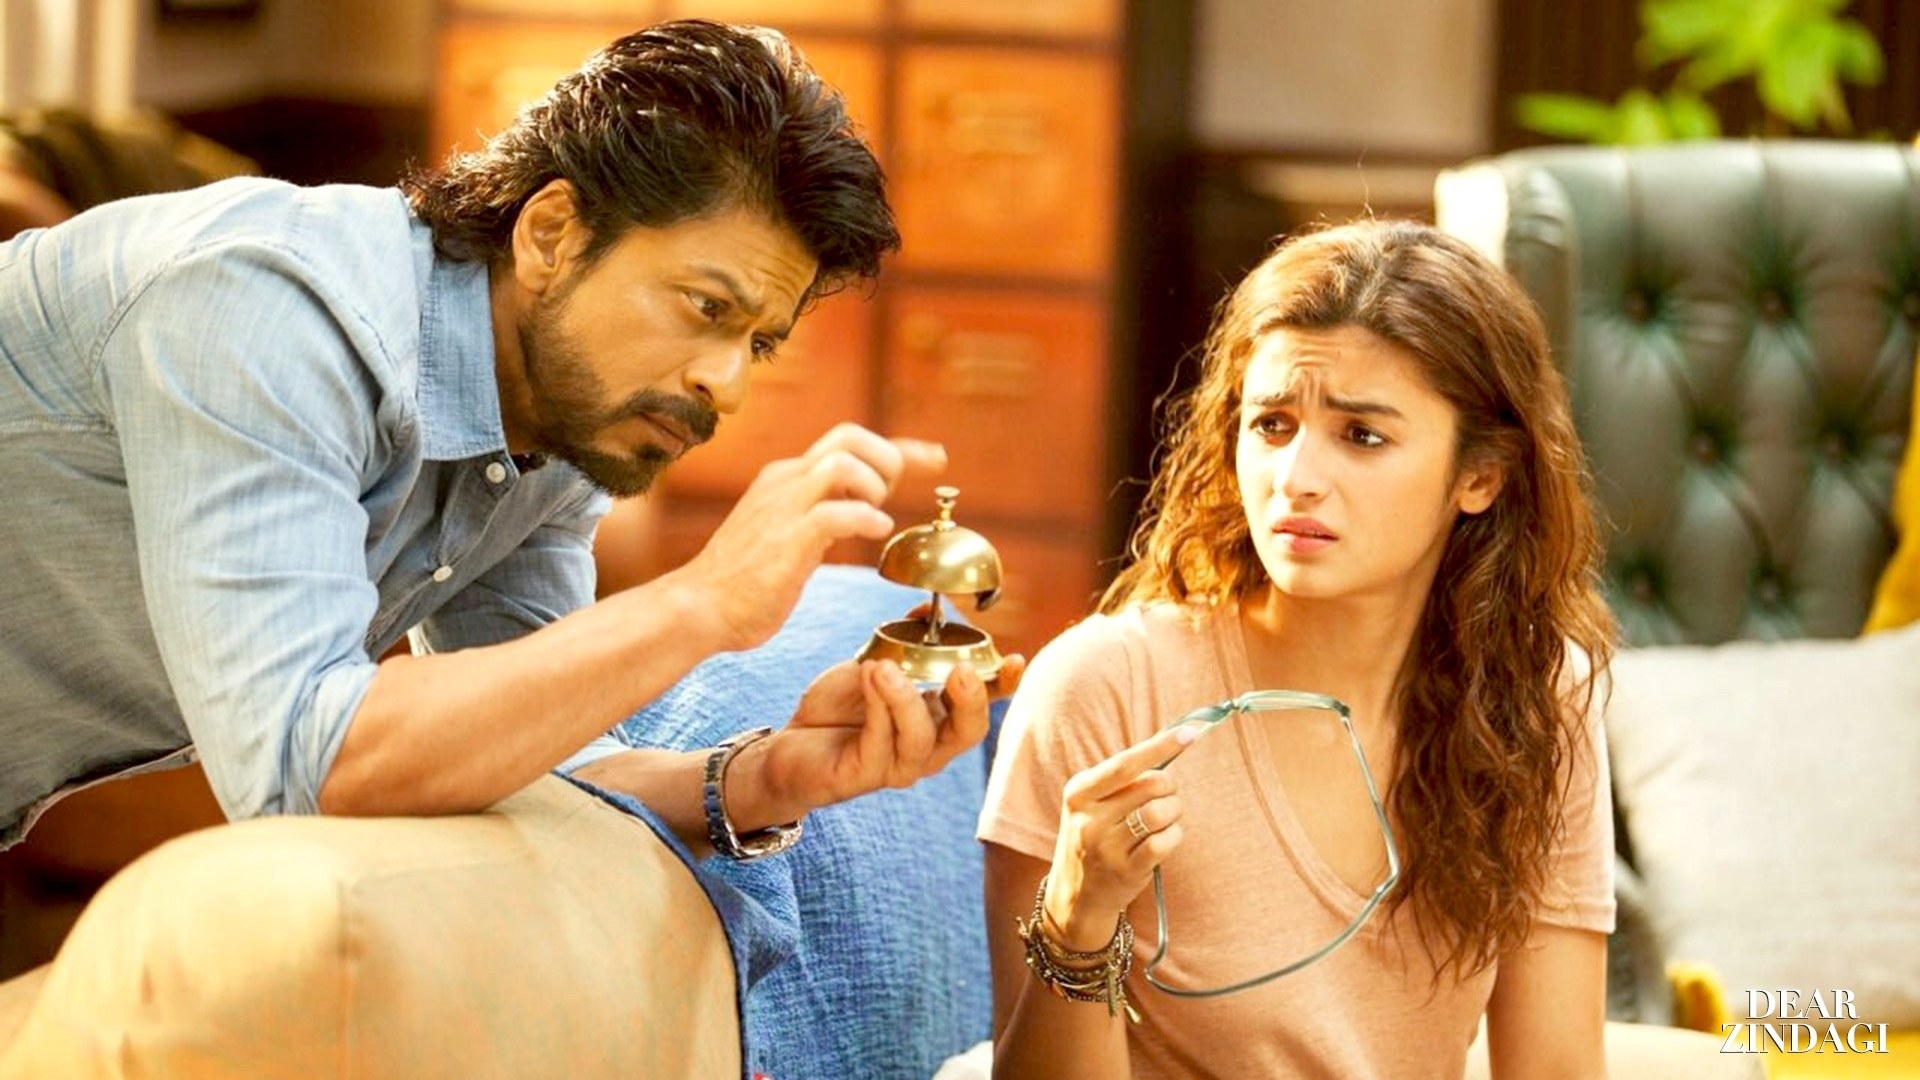 SRK plays with a timer while Alia looks at him frustratingly